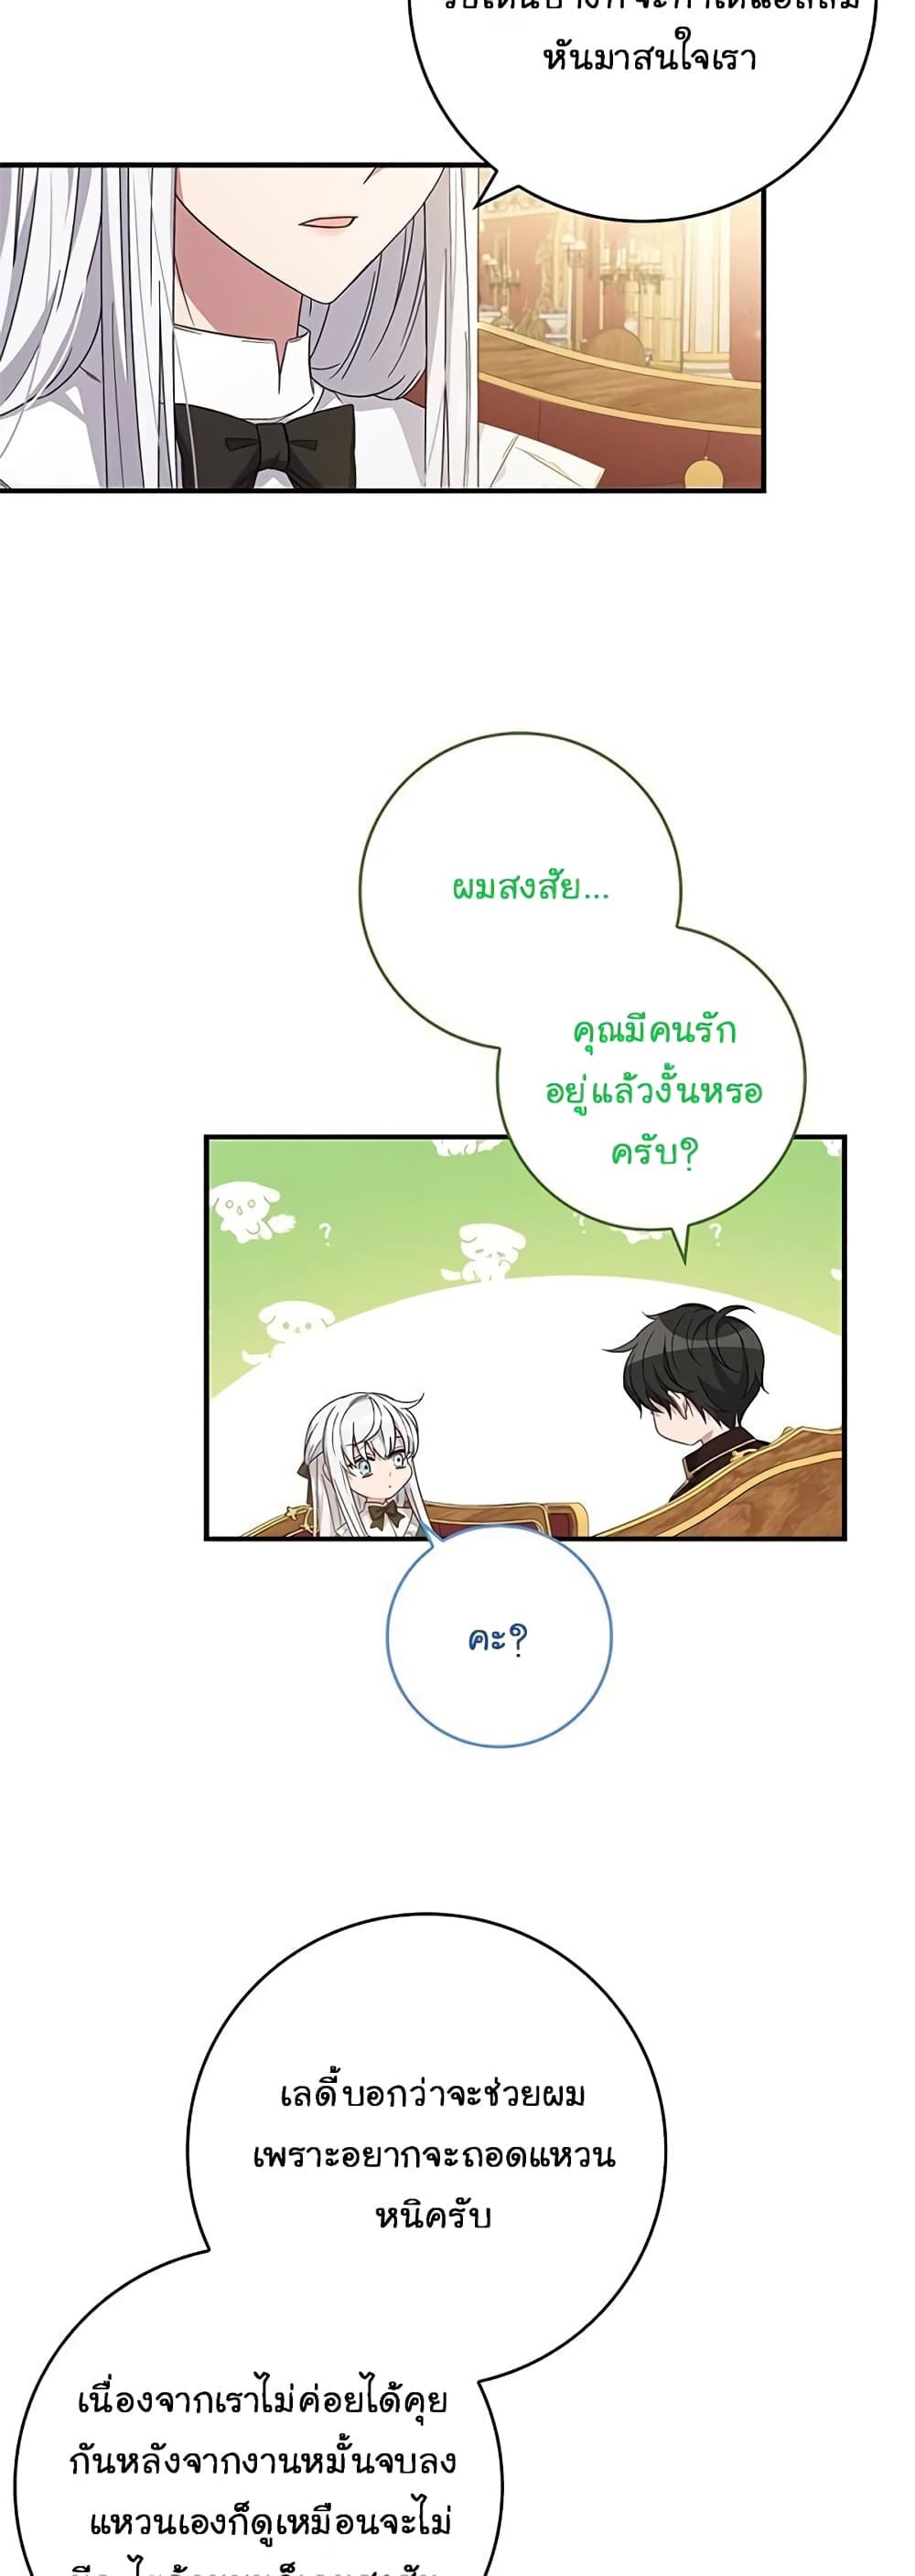 Fakes Don’t Want To Be Real ตอนที่ 9 (17)